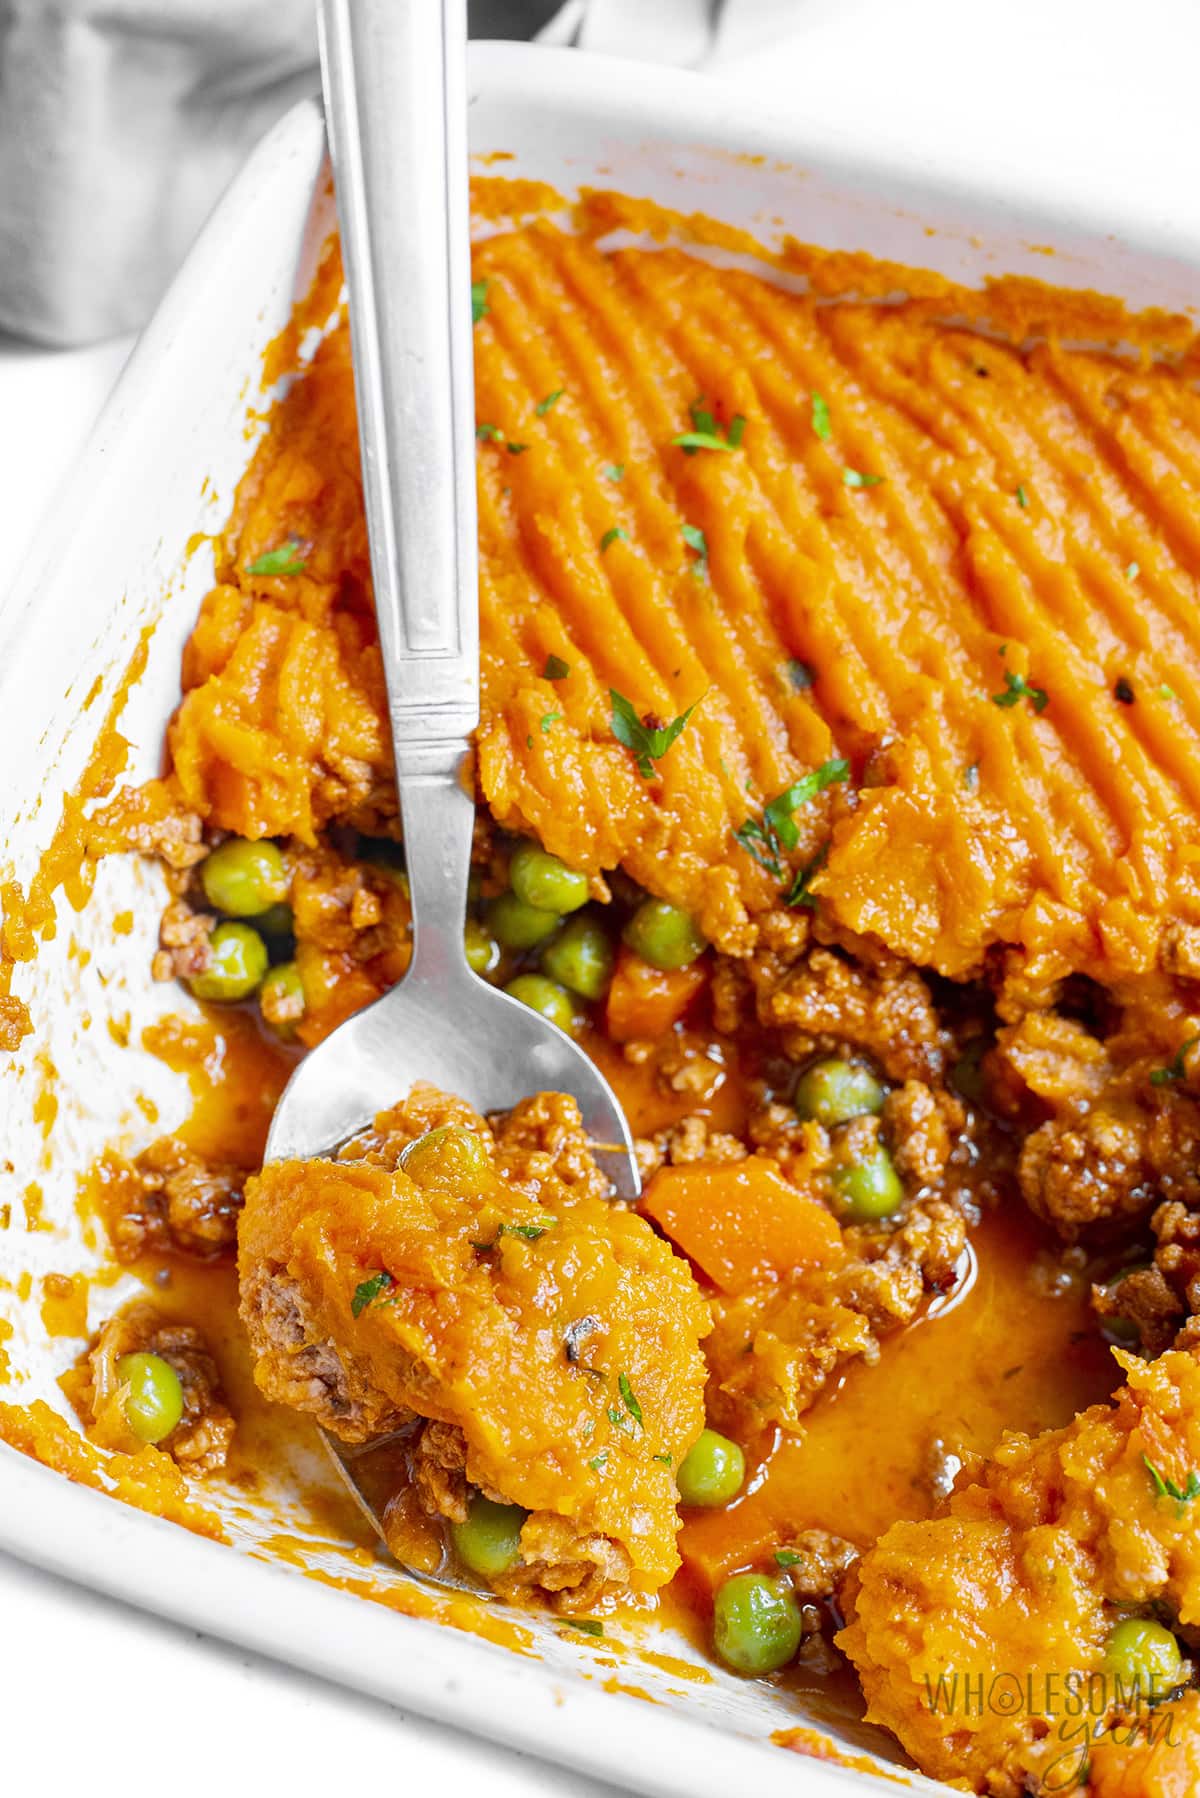 Baked shepherd's pie with sweet potatoes in a dish with a serving spoon.